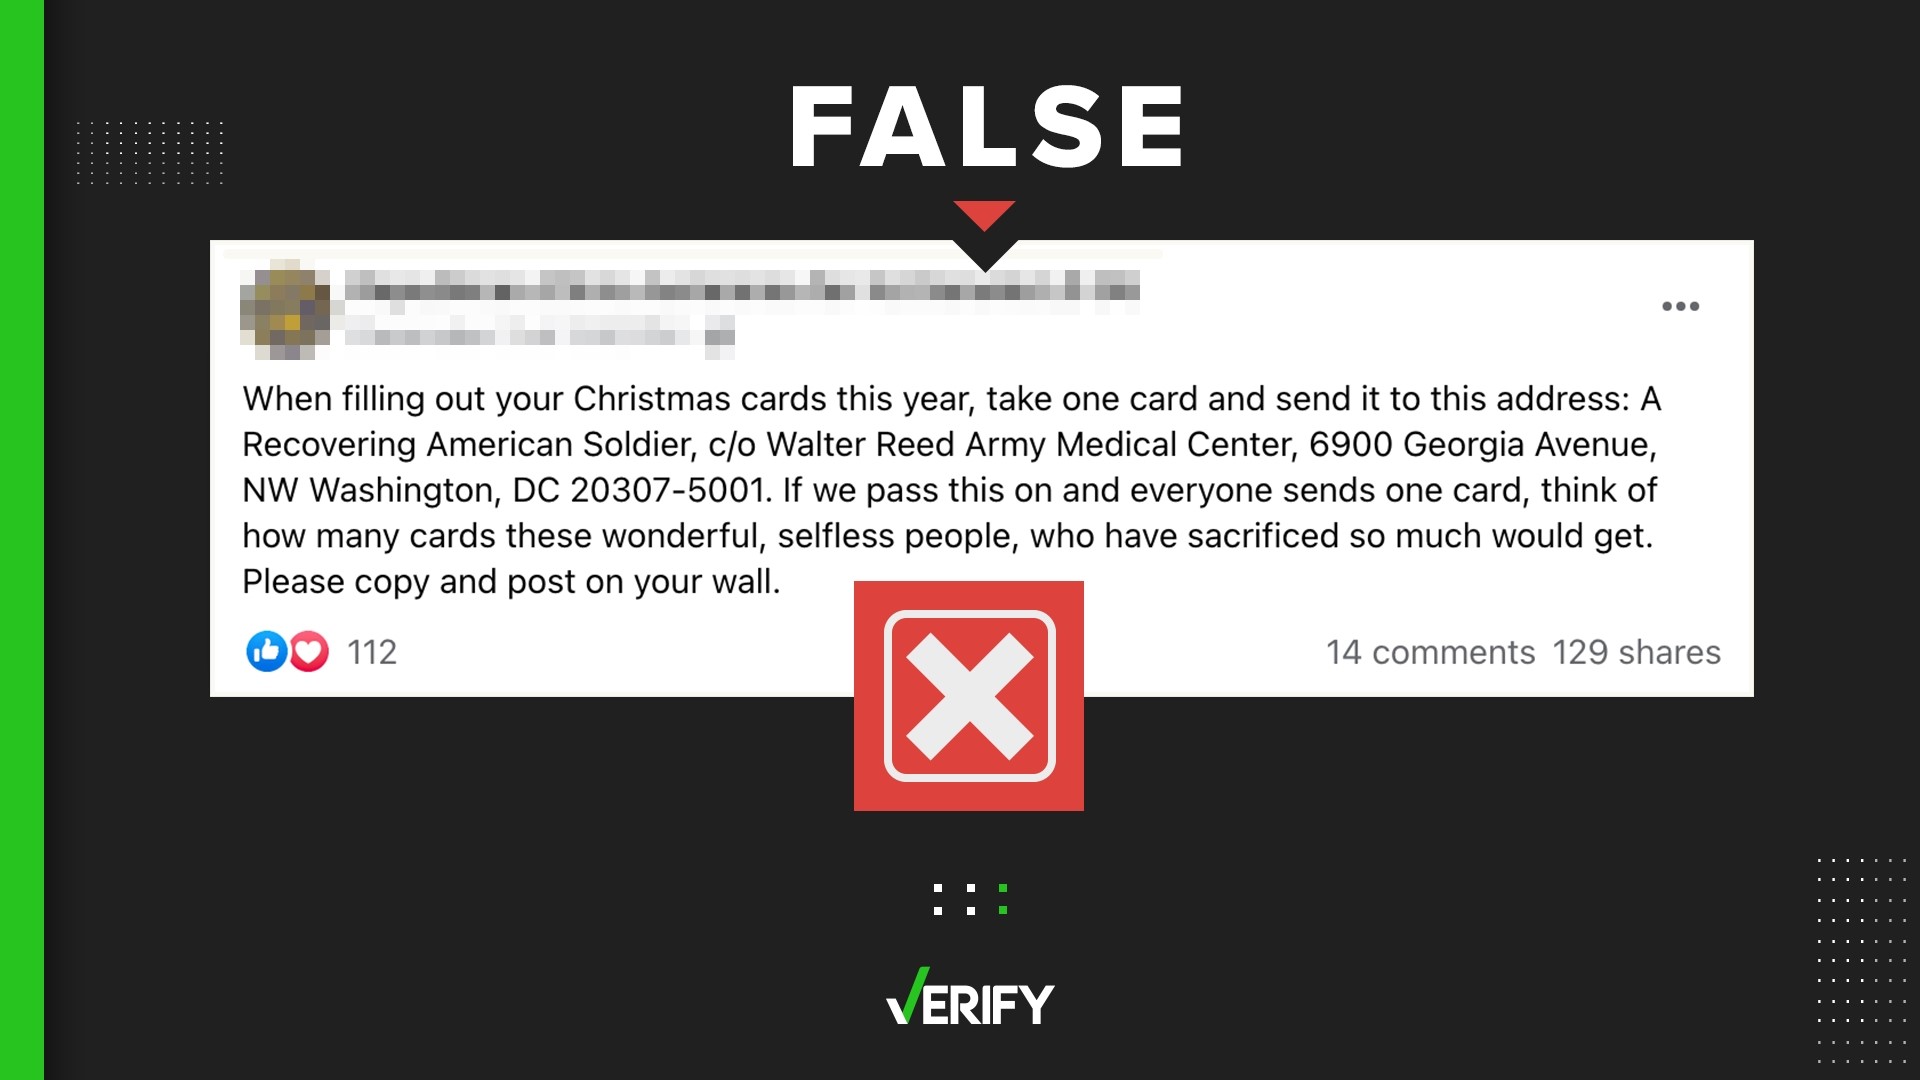 You can support troops this holiday season, but a copypasta meme calling for people to send ‘recovering American soldiers’ Christmas cards won’t work